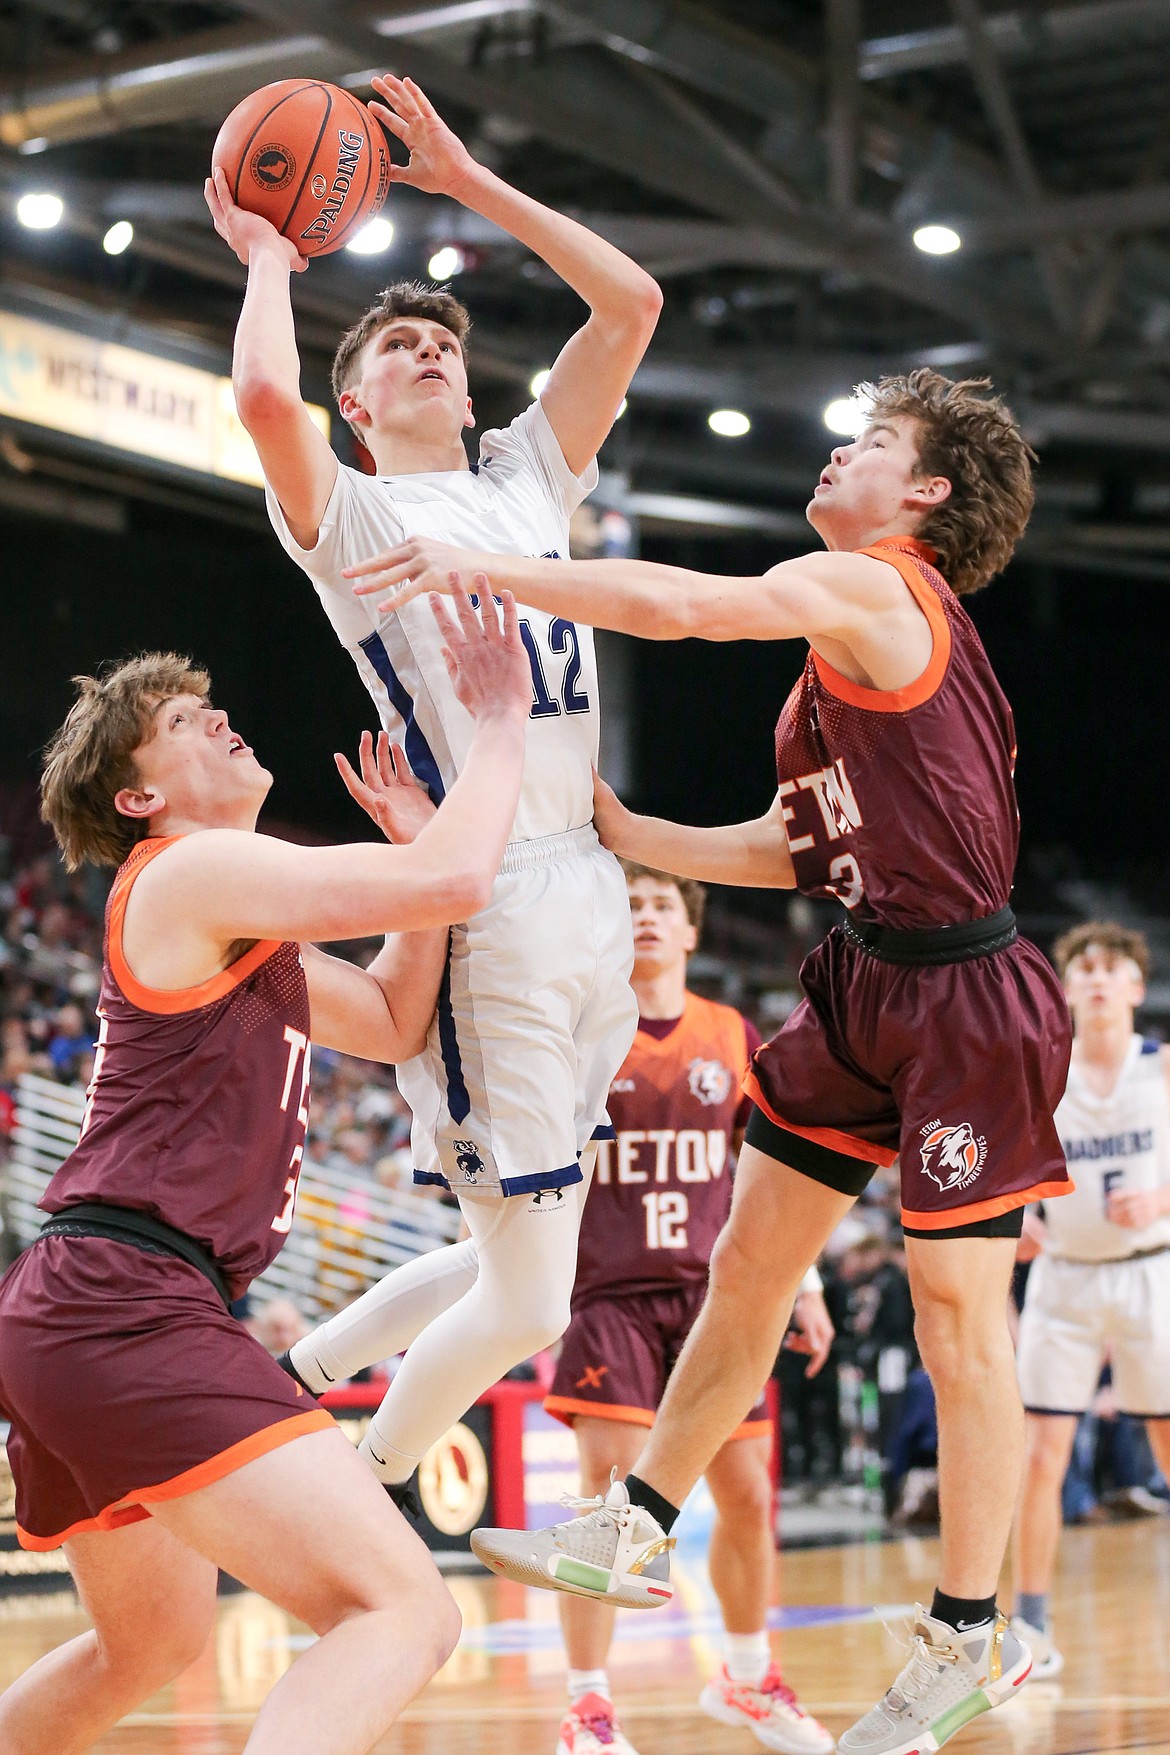 Asher Williams scores a layin against Teton at the 3A State Championship. Williams was named 3A All tournament MVP, scoring 78 points in the three game tournament.